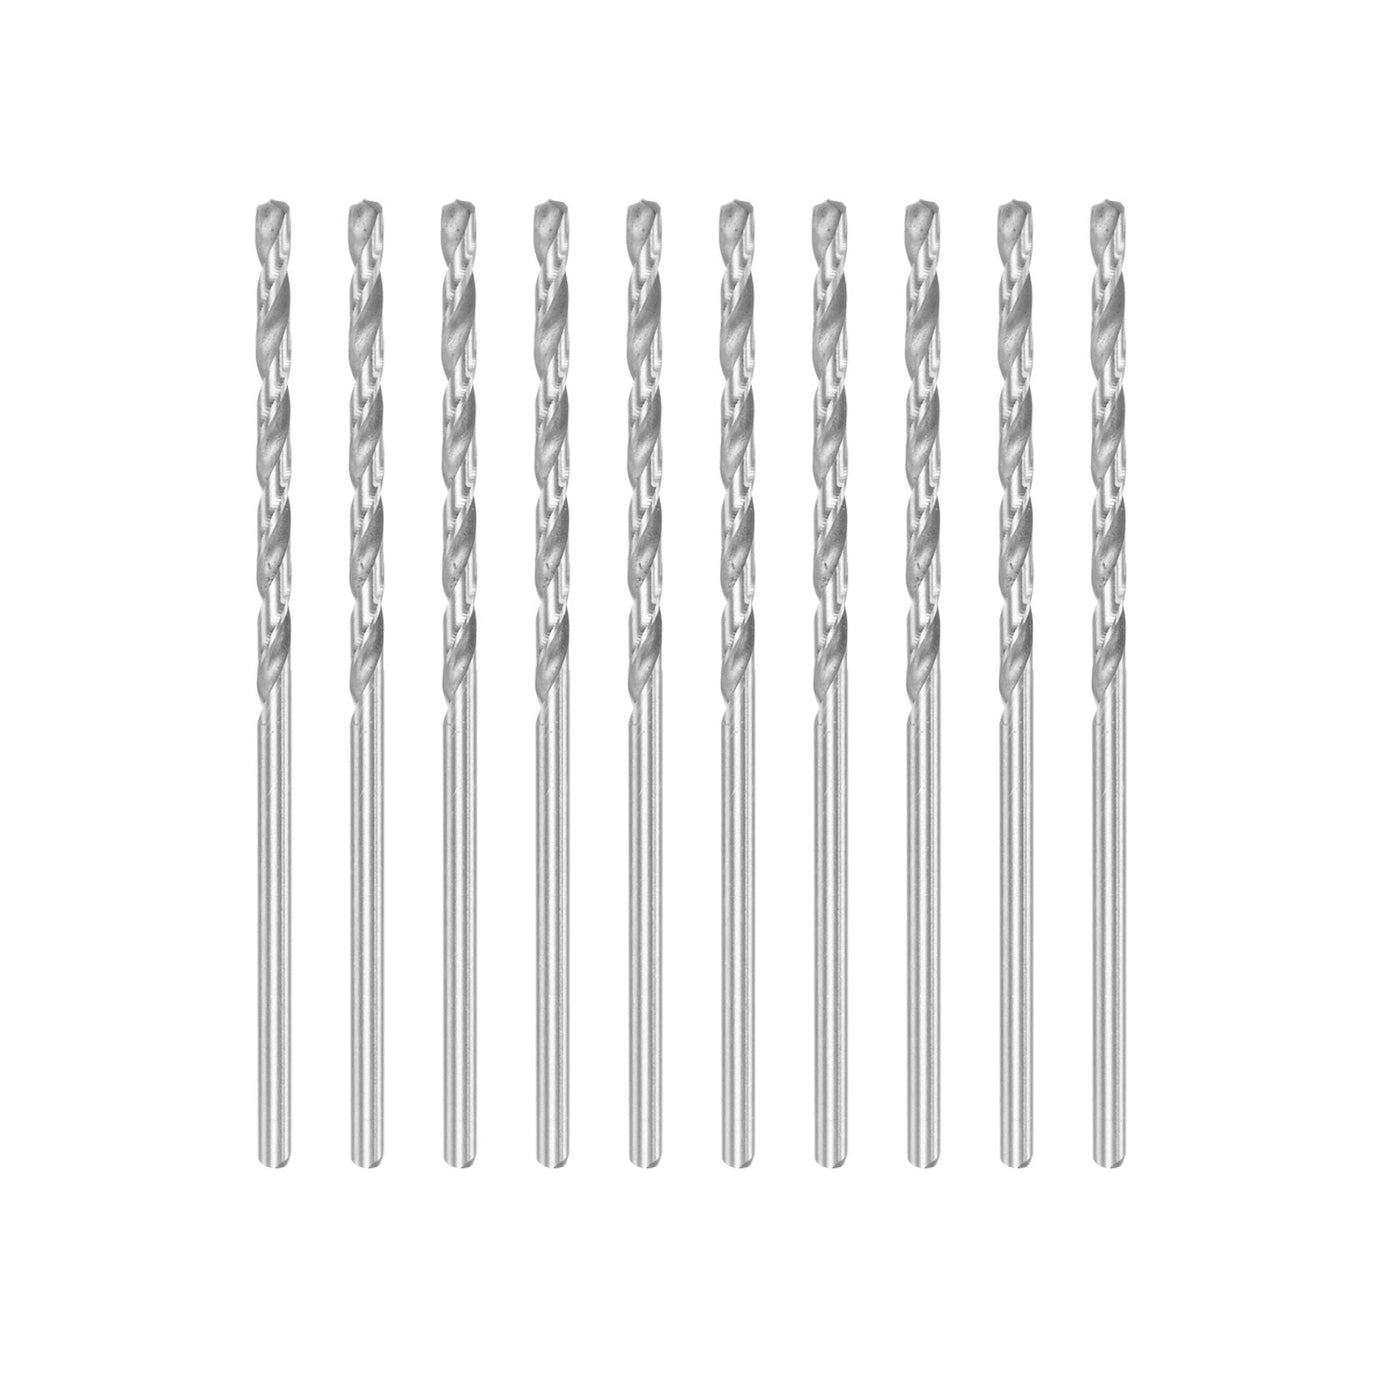 uxcell Uxcell 10 Pcs 1.95mm High Speed Steel Drill Bits, Fully Ground 55mm Length Drill Bit